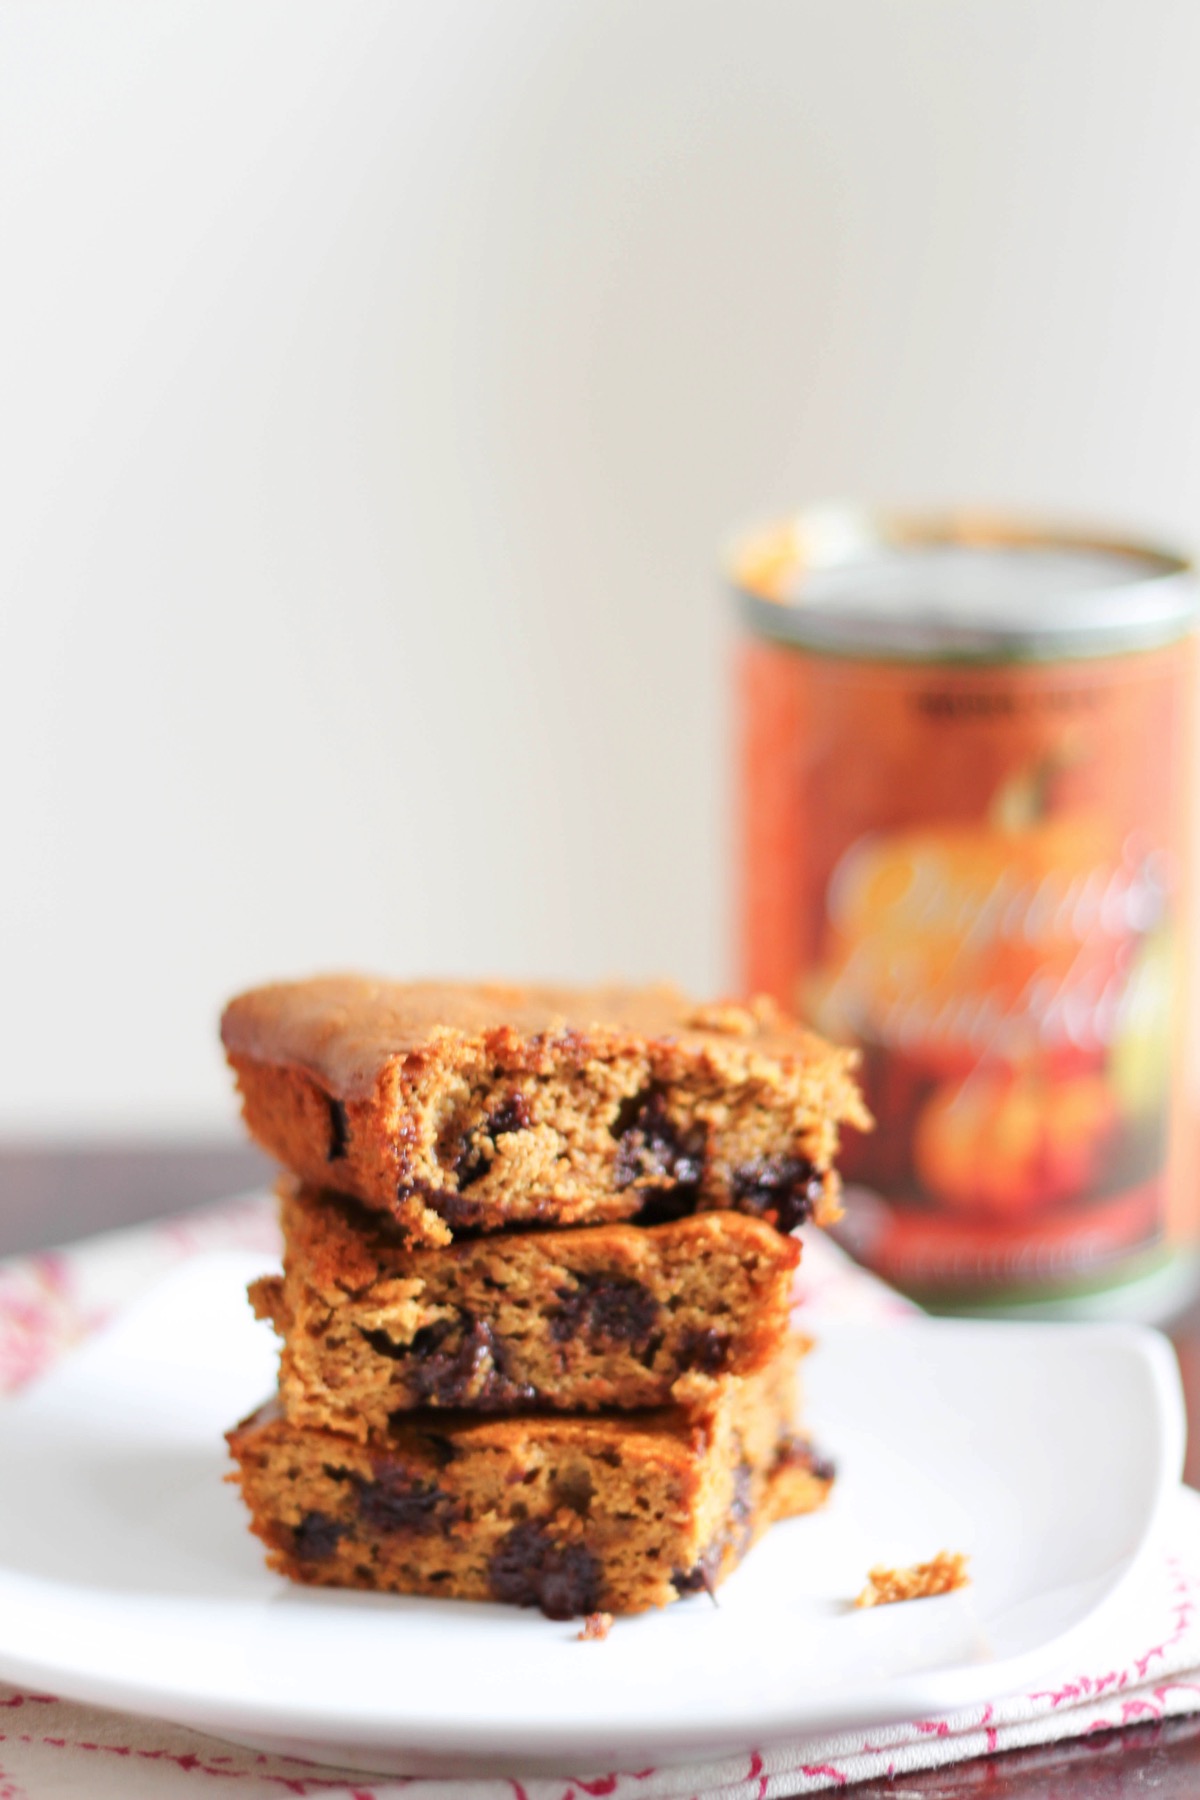 Flourless pumpkin chocolate chip bars! a holiday treat that's secretly packed with nutrition and under 200 calories per serving